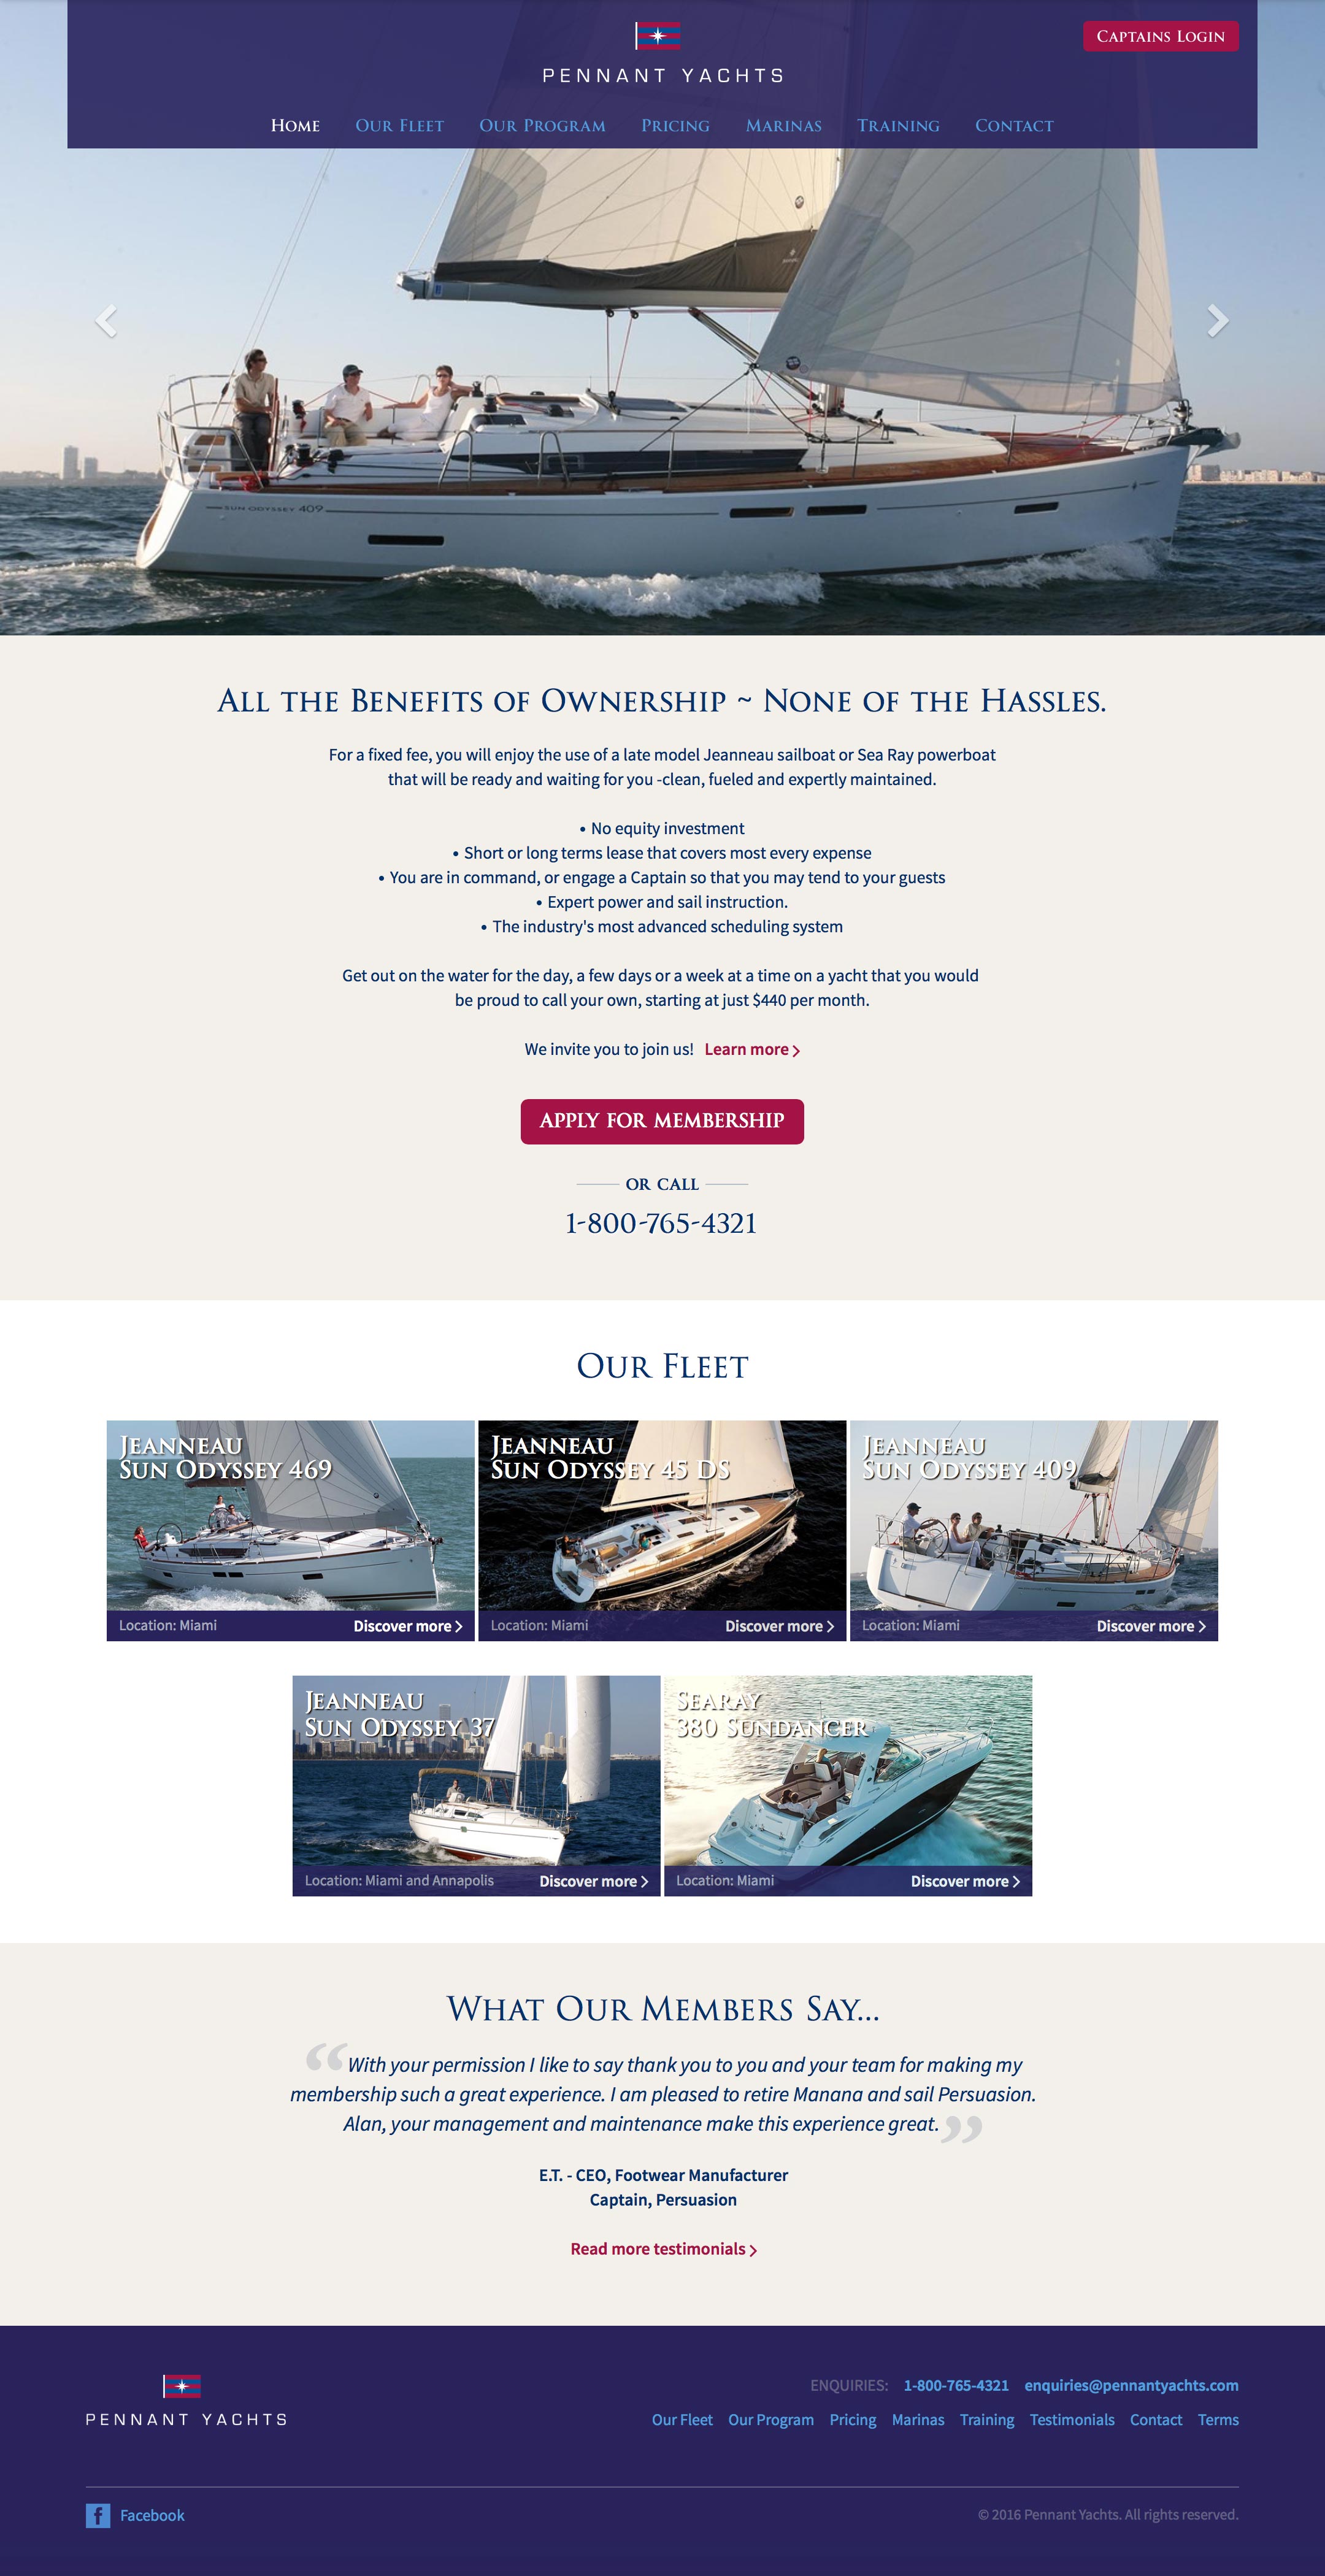 Pennant Yachts homepage.